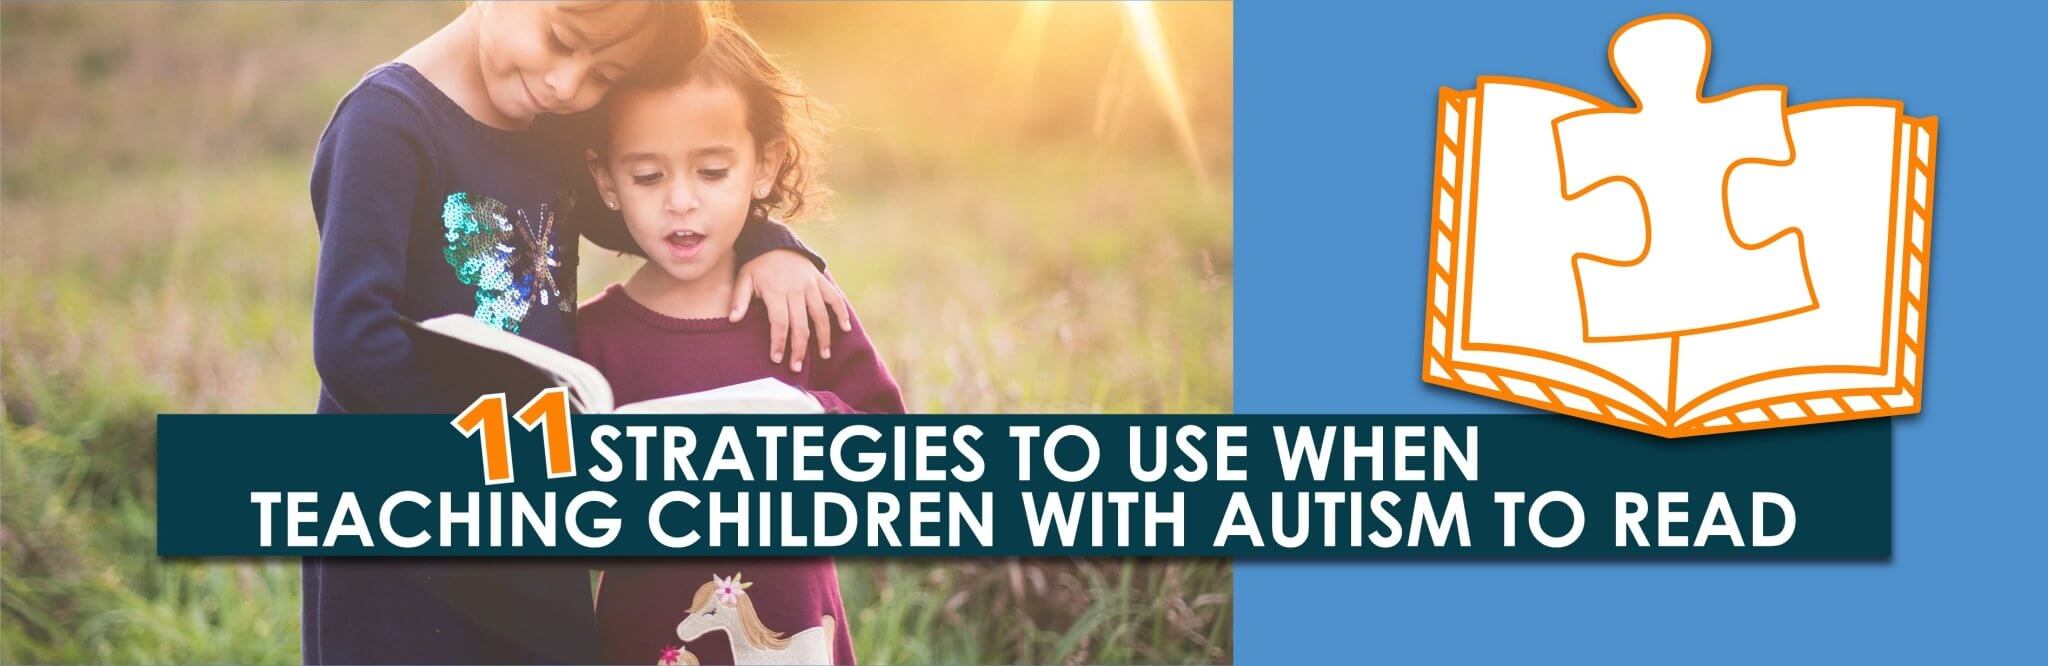 11 Strategies to Use When Teaching Children with Autism to Read